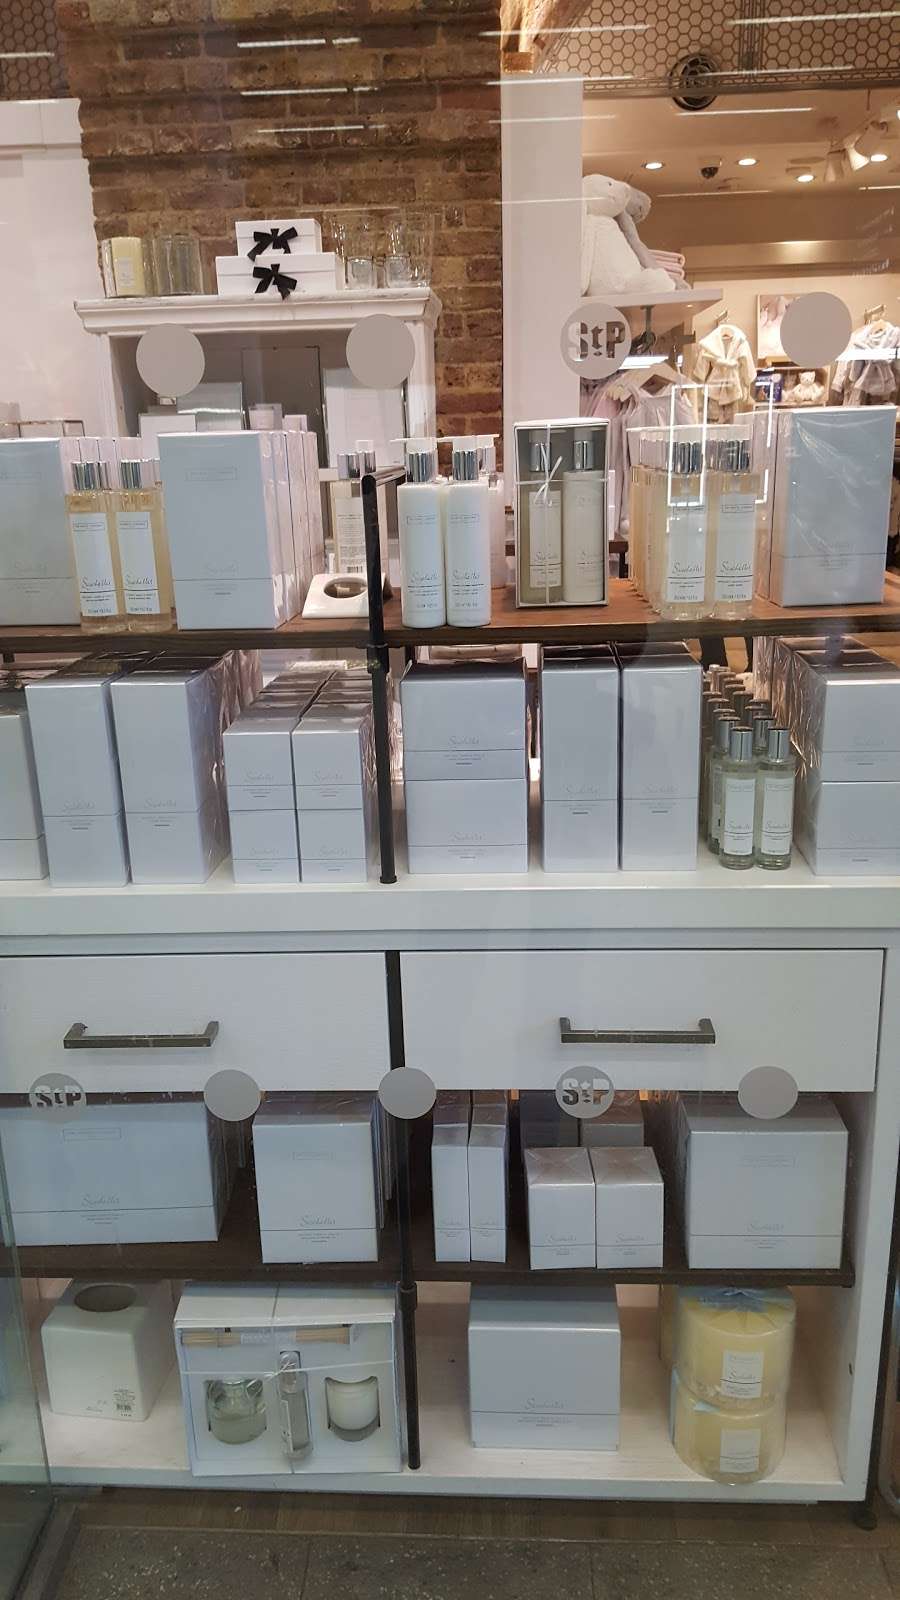 The White Company | The Arcade, Lower Concourse, St Pancras International Station, Pancras Rd, Kings Cross, London NW1 2QP, UK | Phone: 020 3589 0525